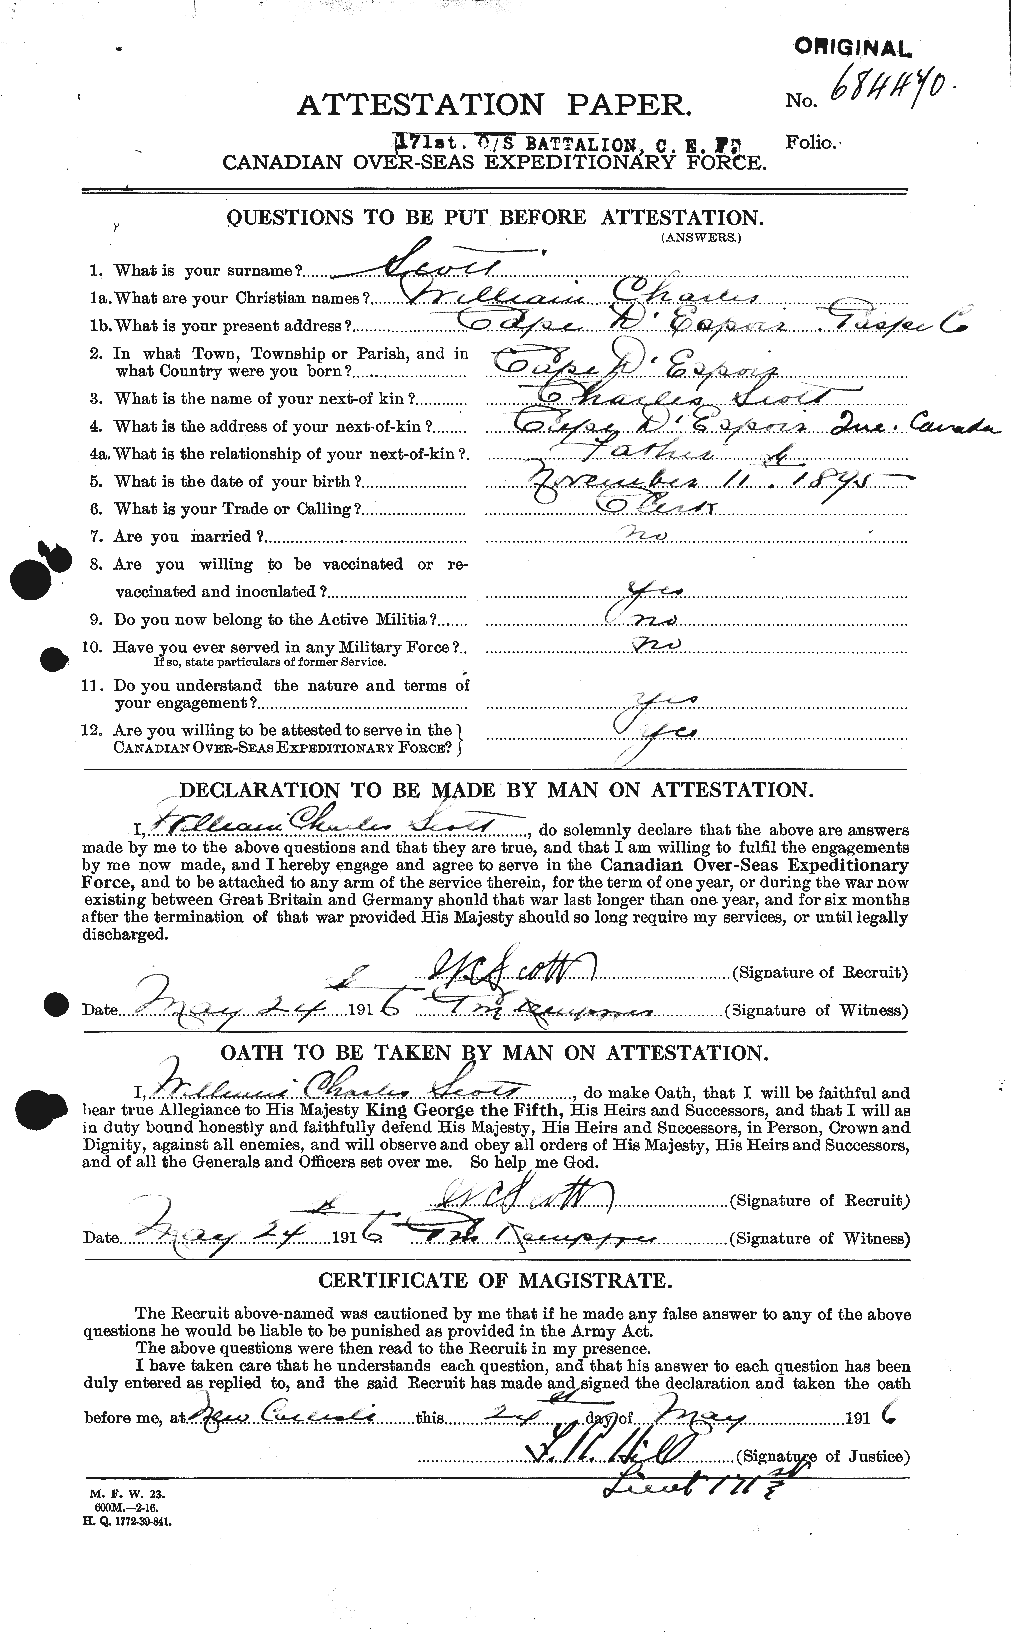 Personnel Records of the First World War - CEF 087042a